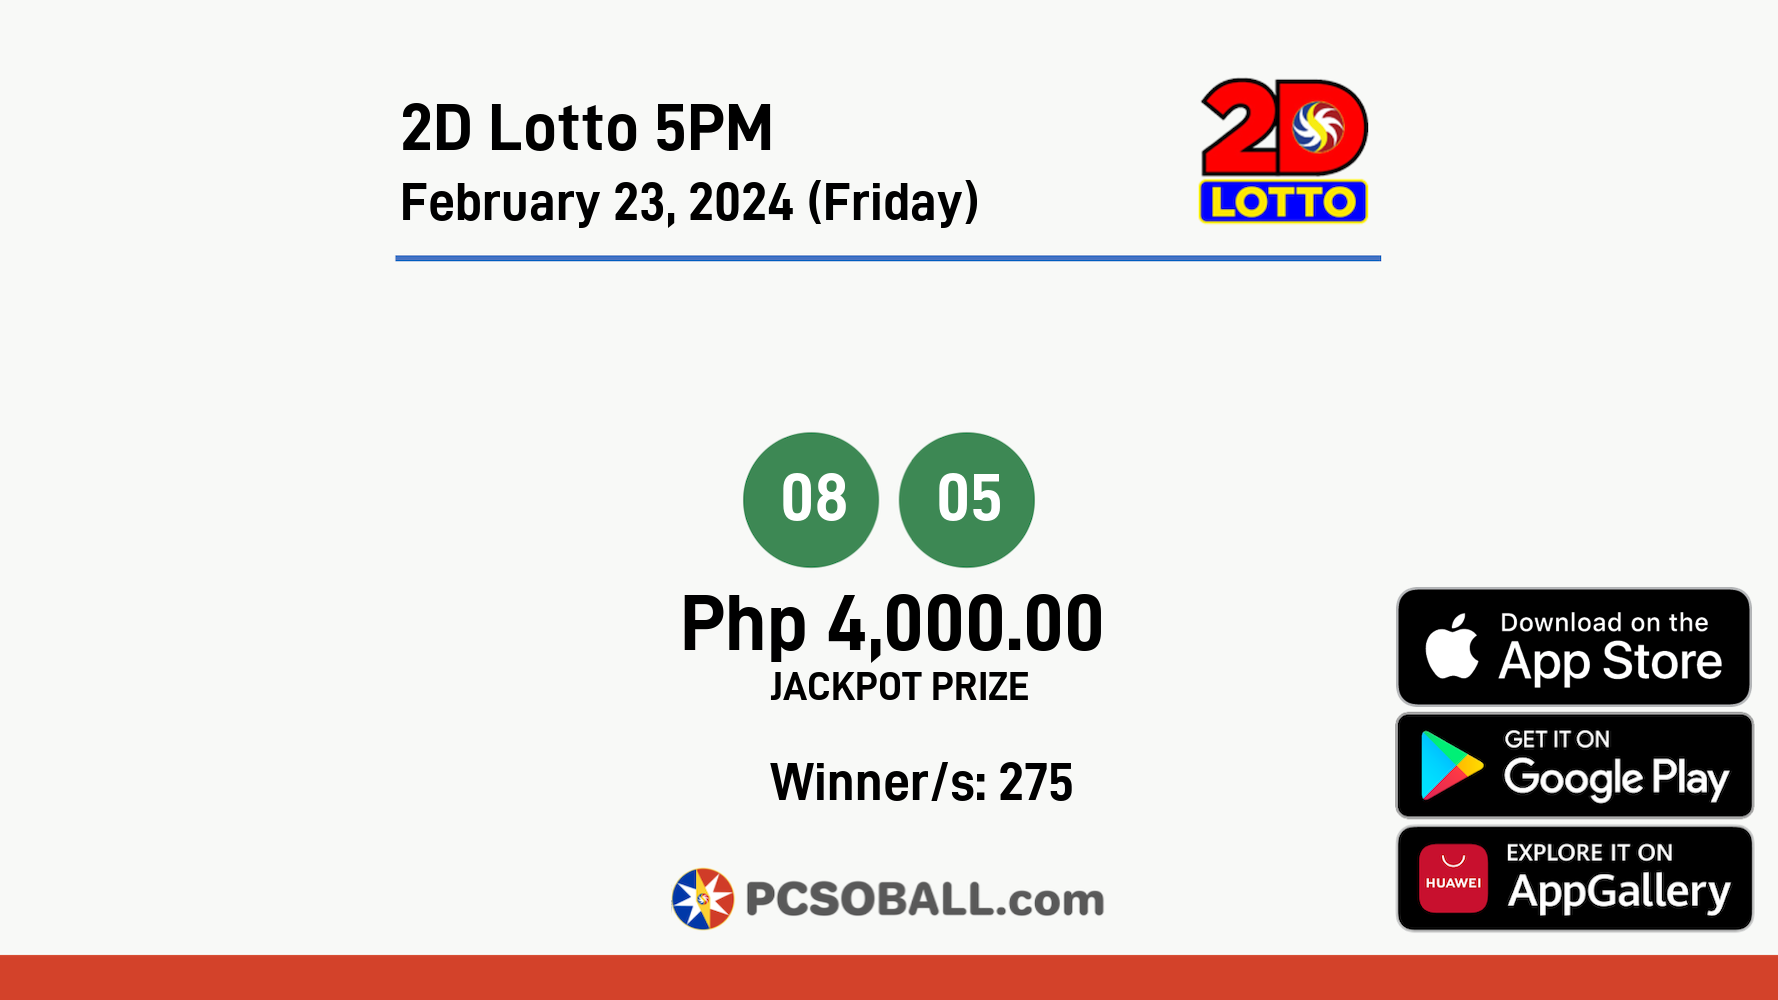 2D Lotto 5PM February 23, 2024 (Friday) Result